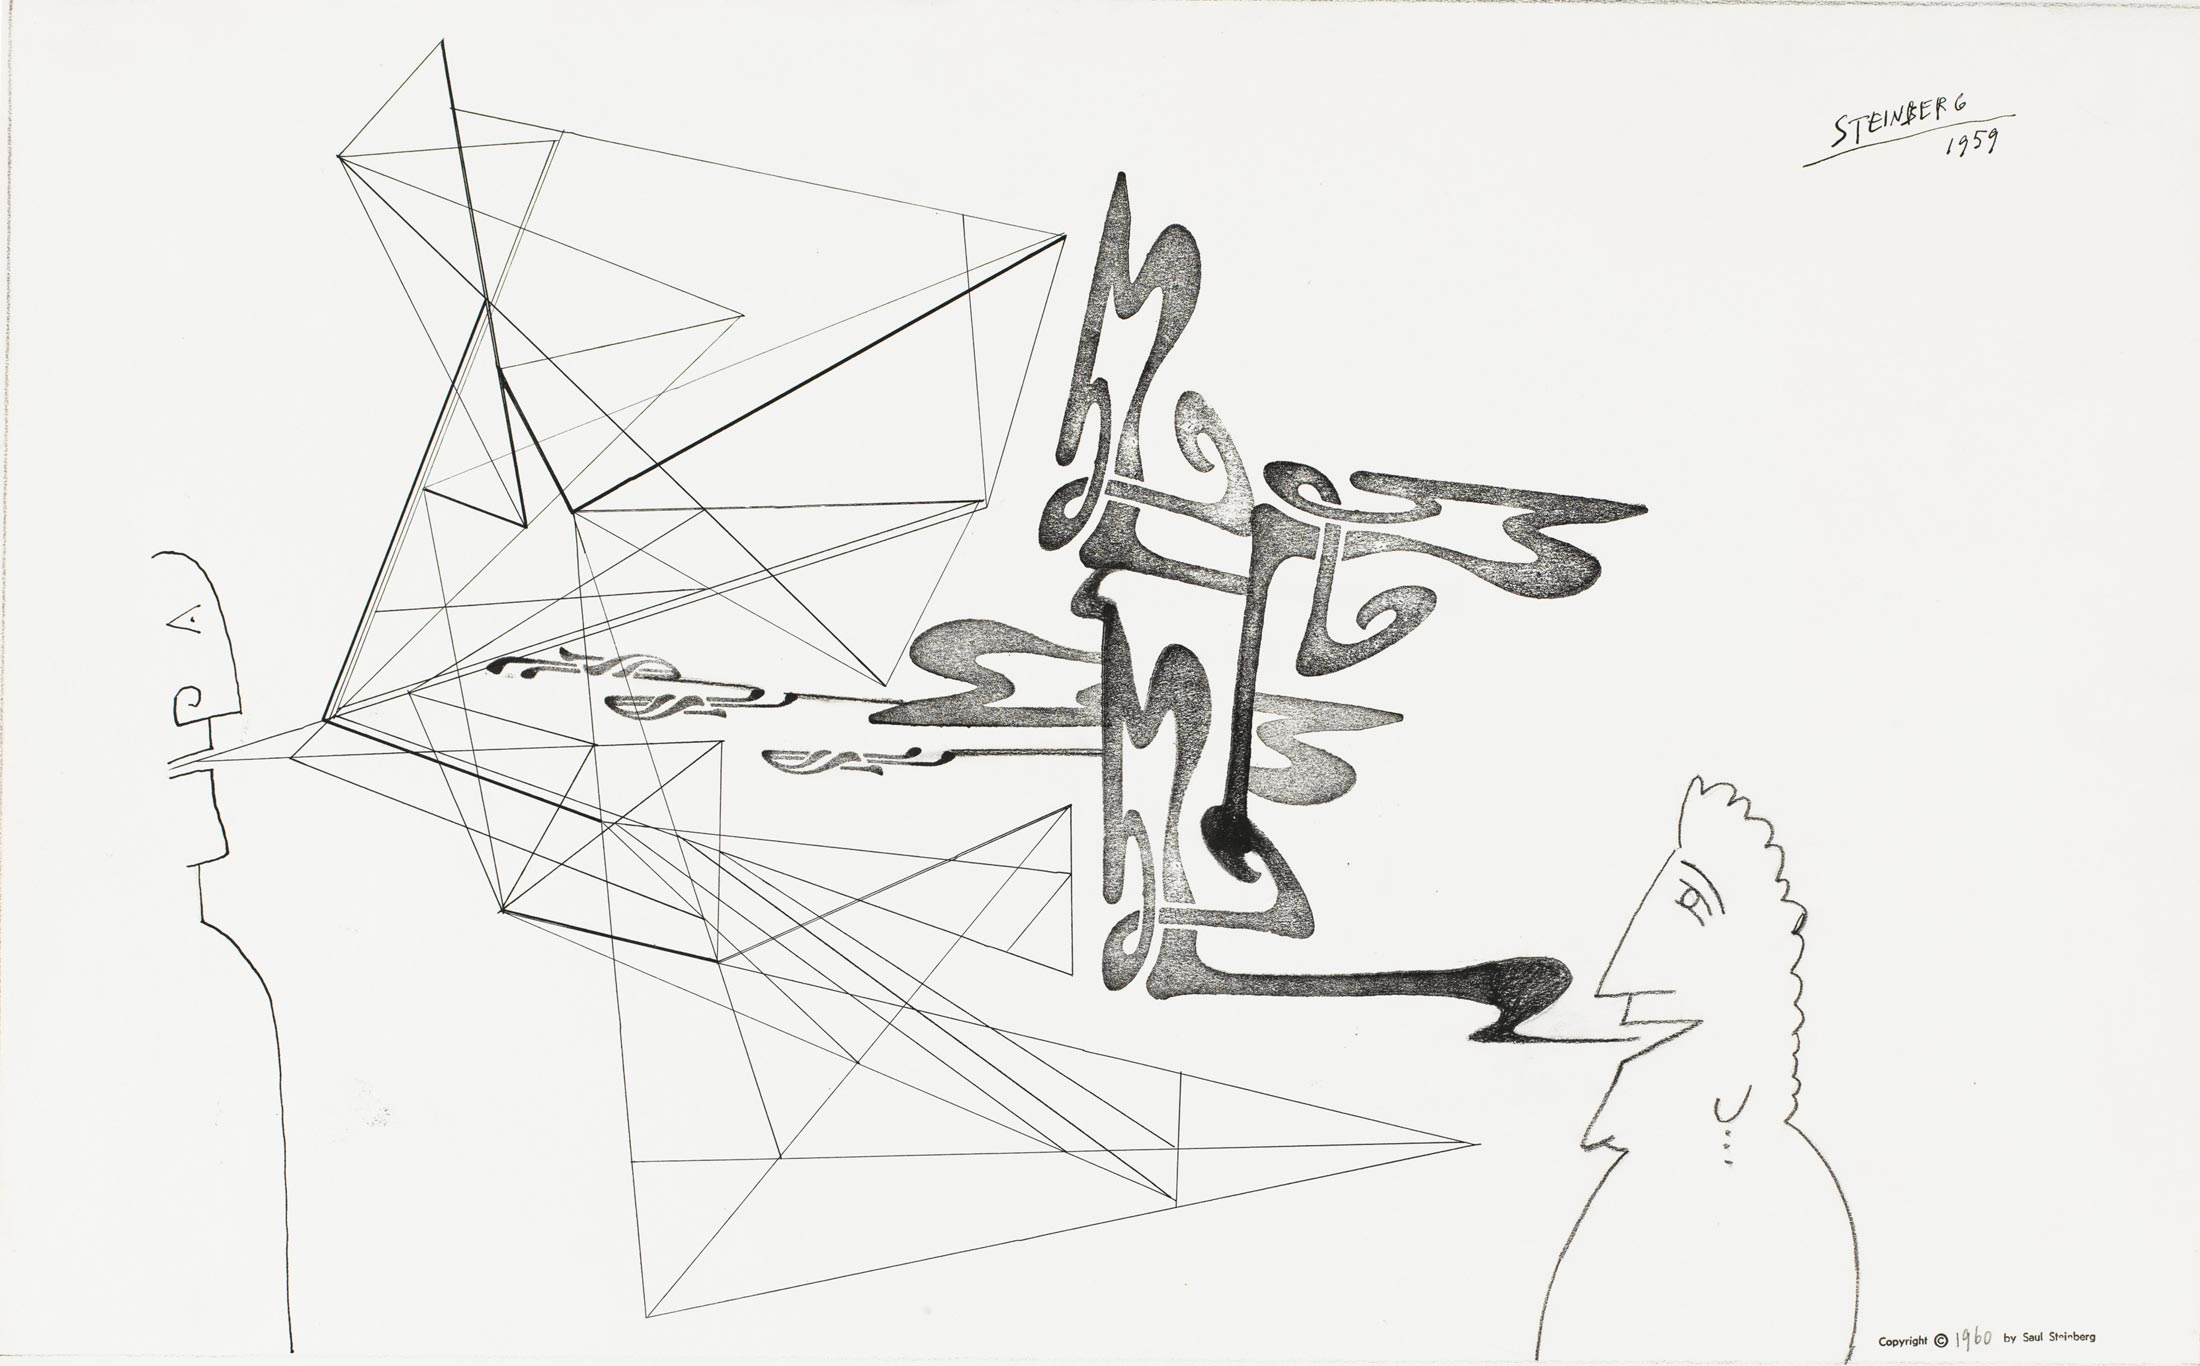 <em>Speech</em>, 1959. Ink, pencil, conté crayon, and rubber stamps on paper, 15 x 20 in. The Saul Steinberg Foundation.